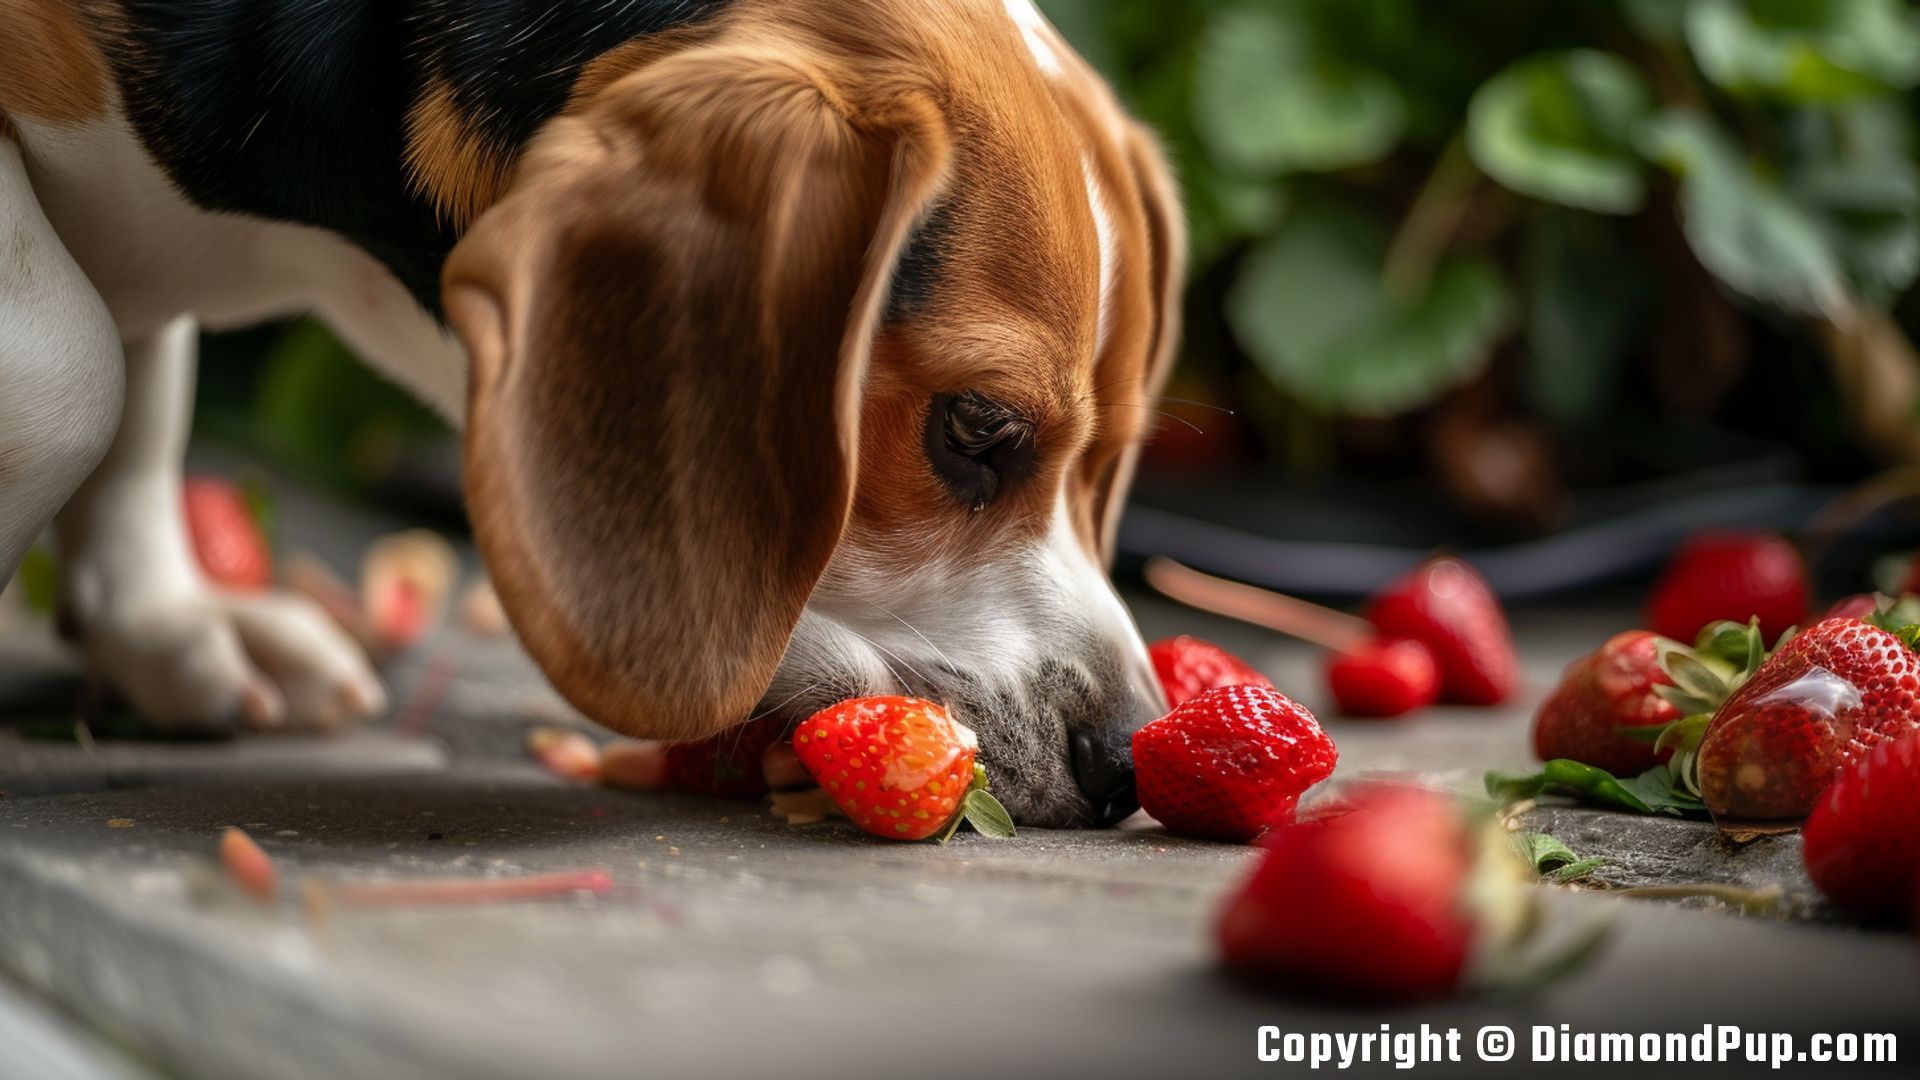 Photo of a Cute Beagle Snacking on Strawberries